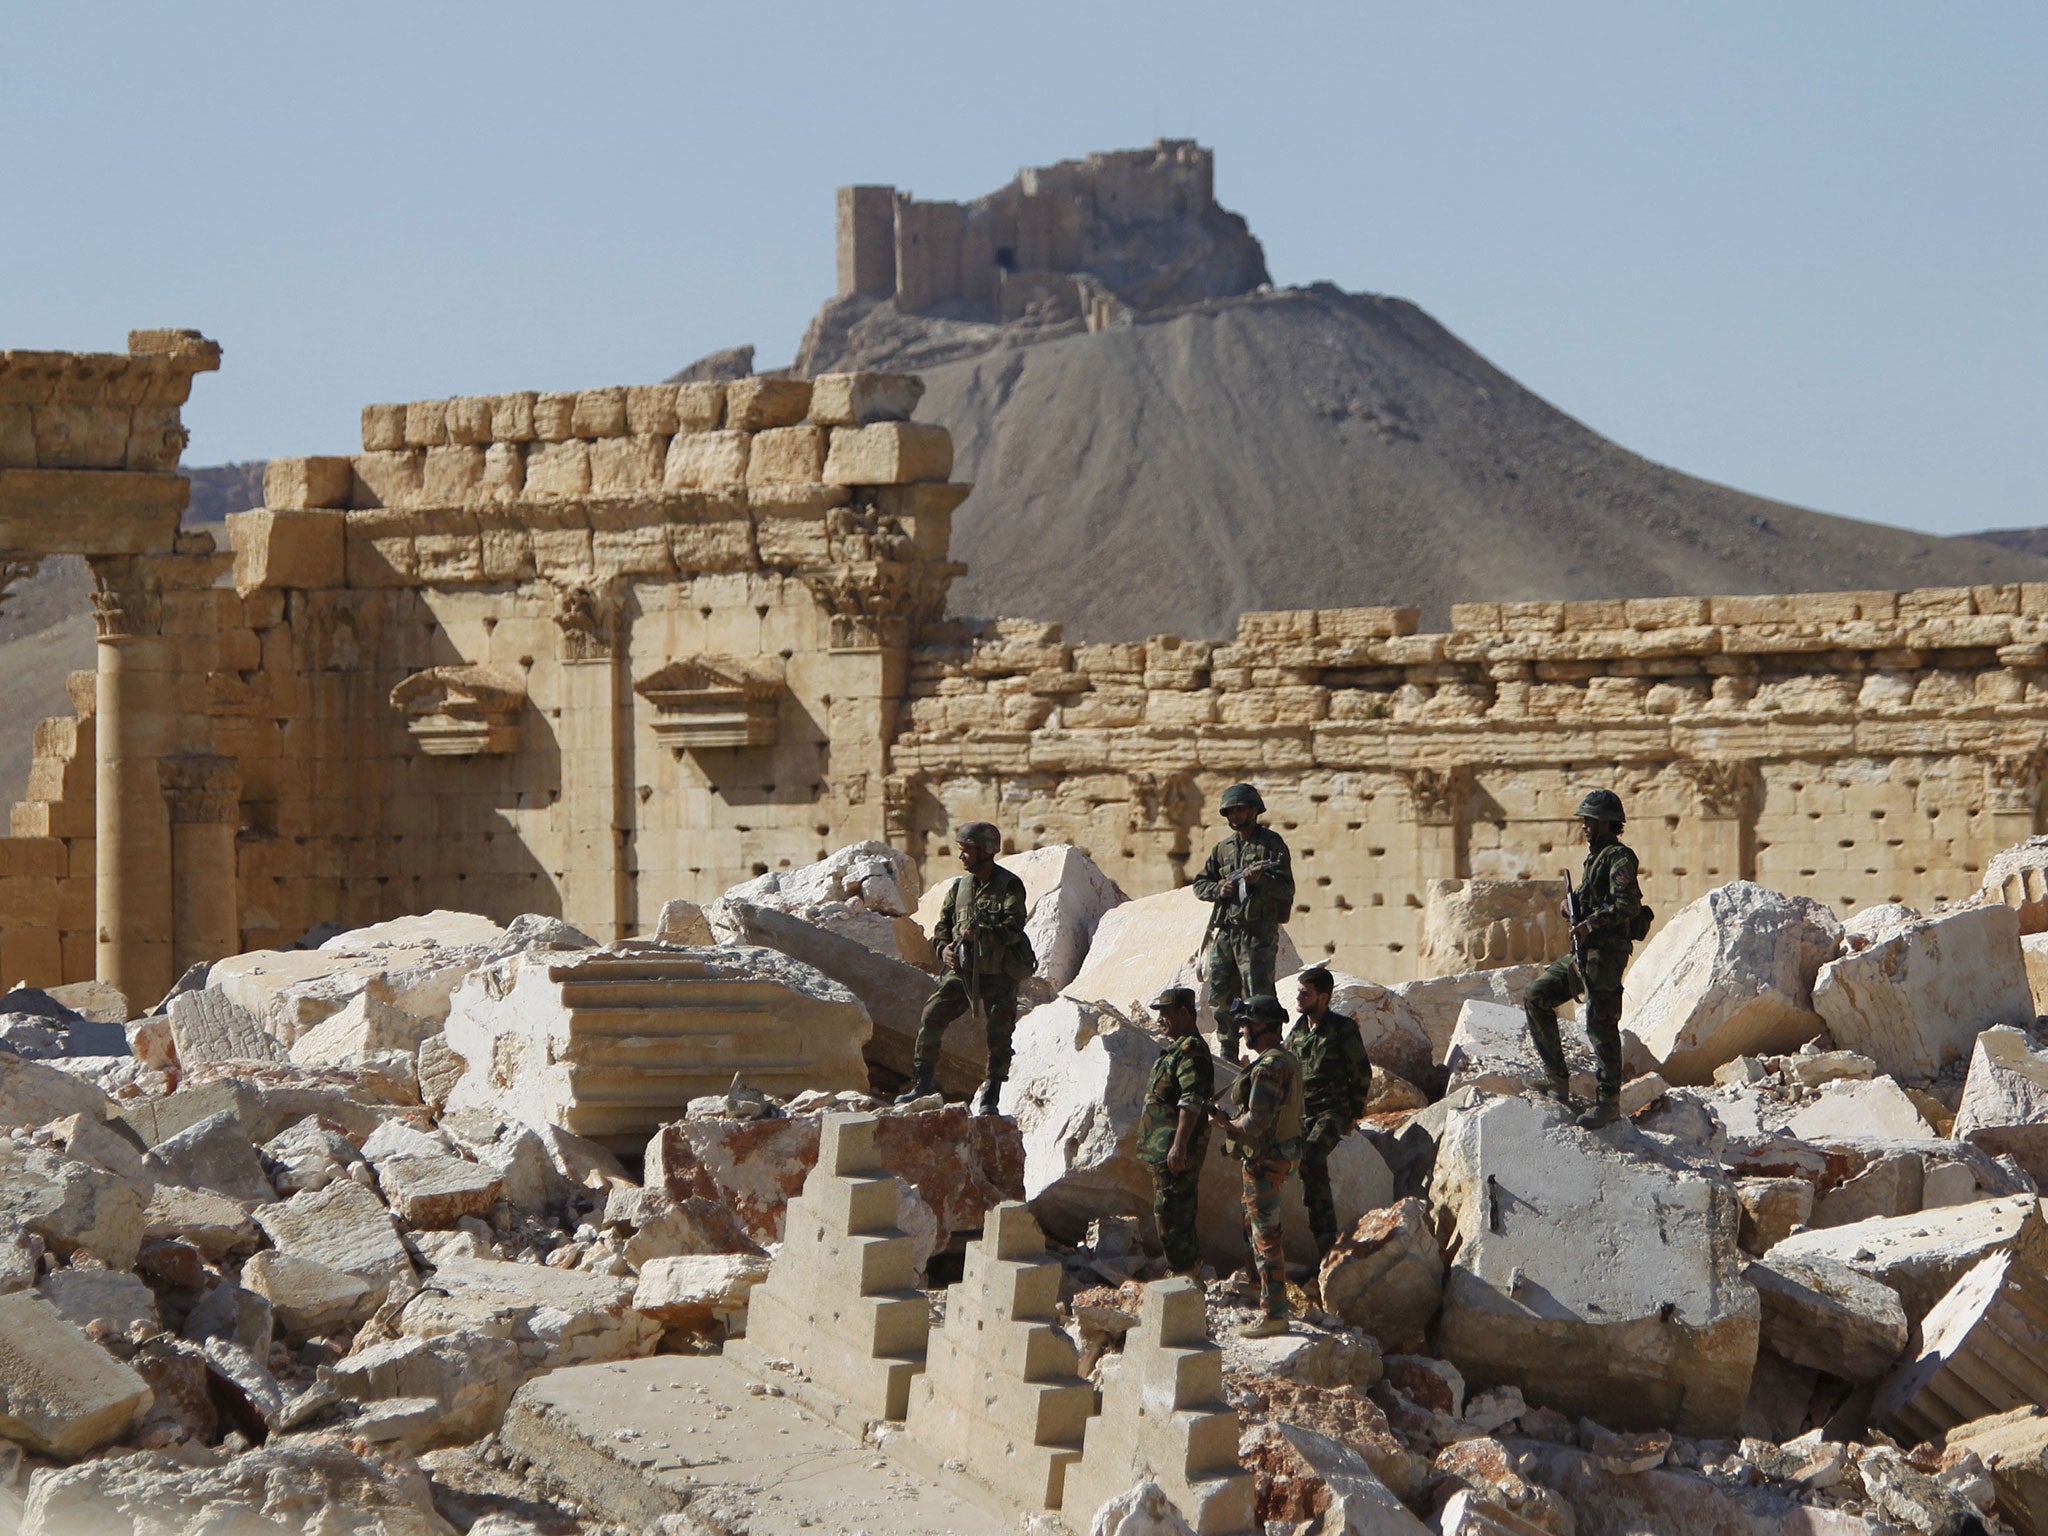 Syrian army soldiers in the ruins of the temple of Bel in Palmyra, which was retaken from Isis